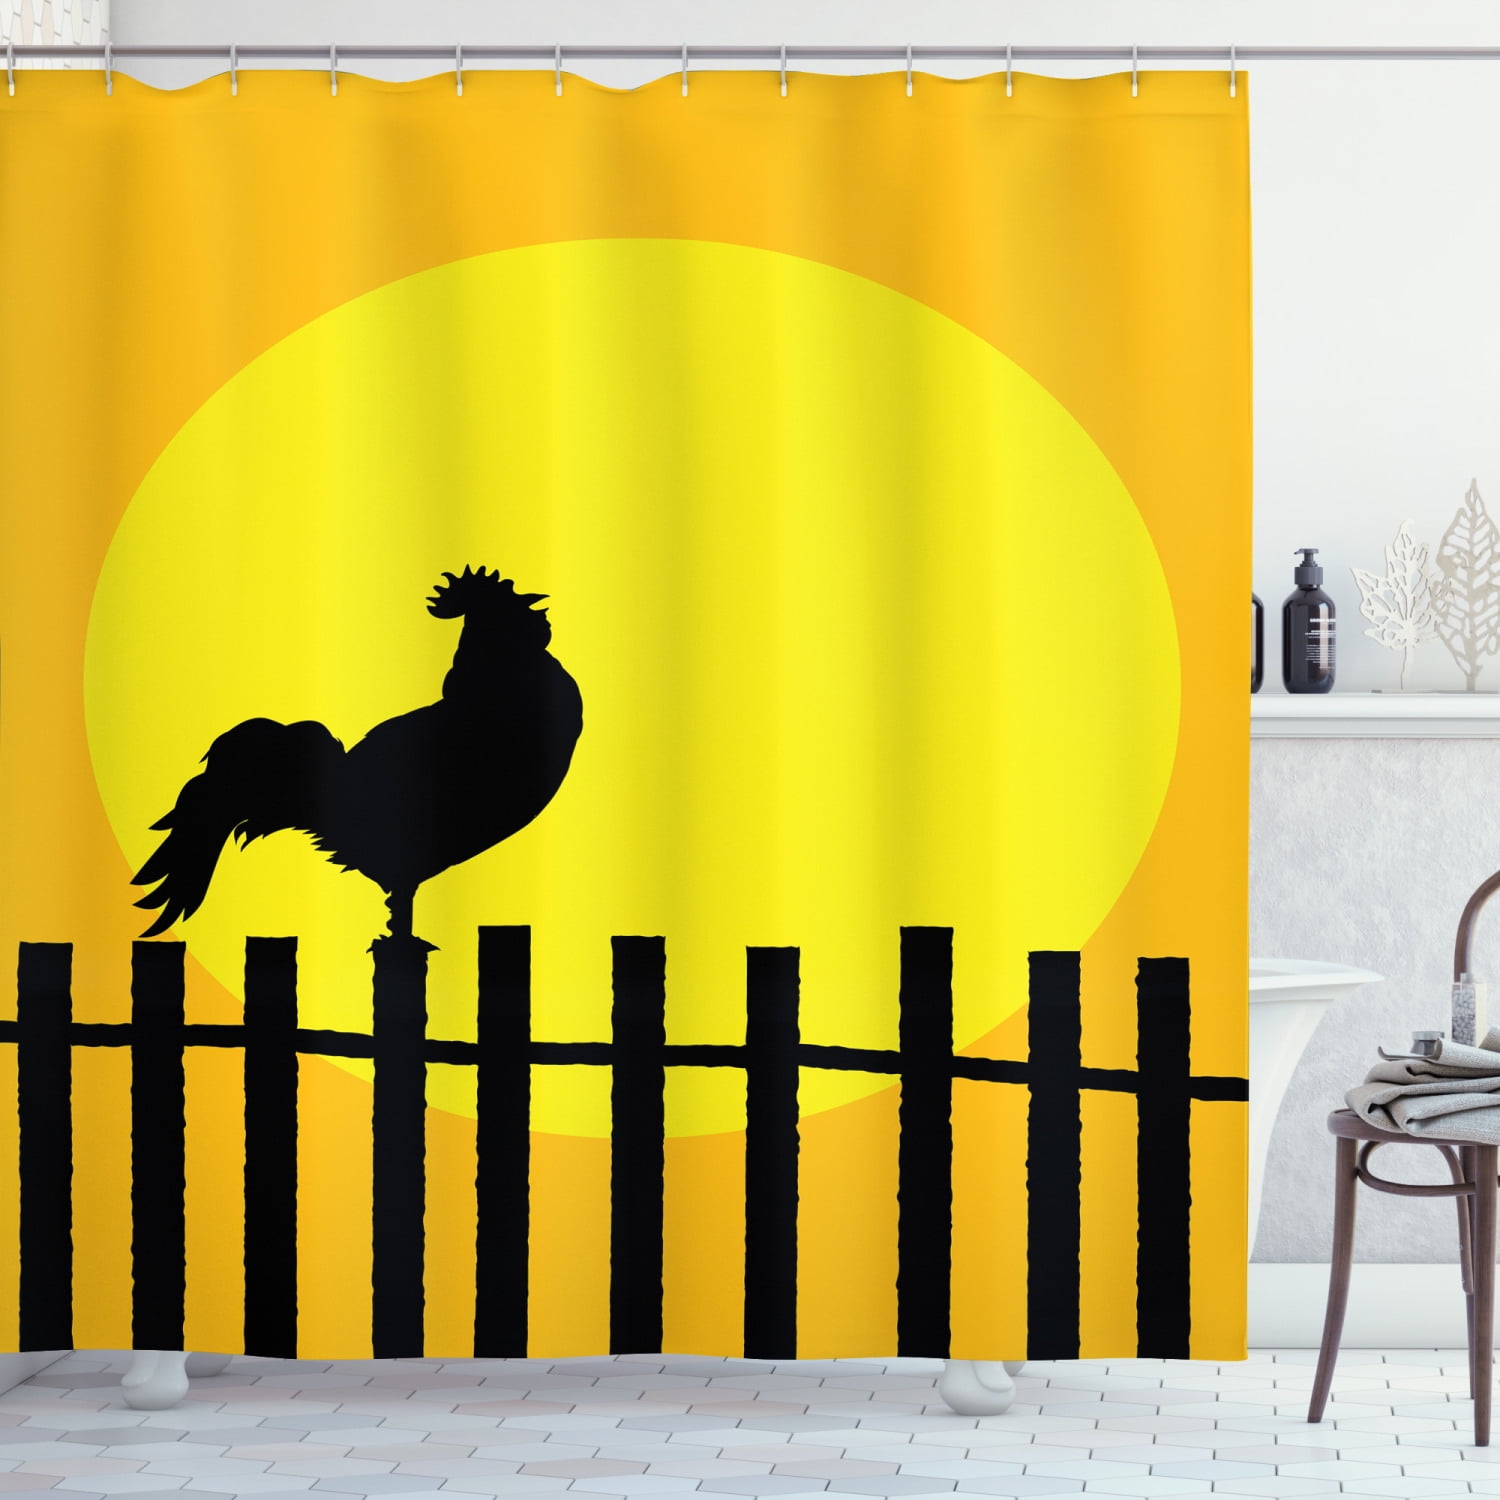 Farm animals rooster Shower Curtain Bathroom Fabric & 12hooks 71 x 71 inches 